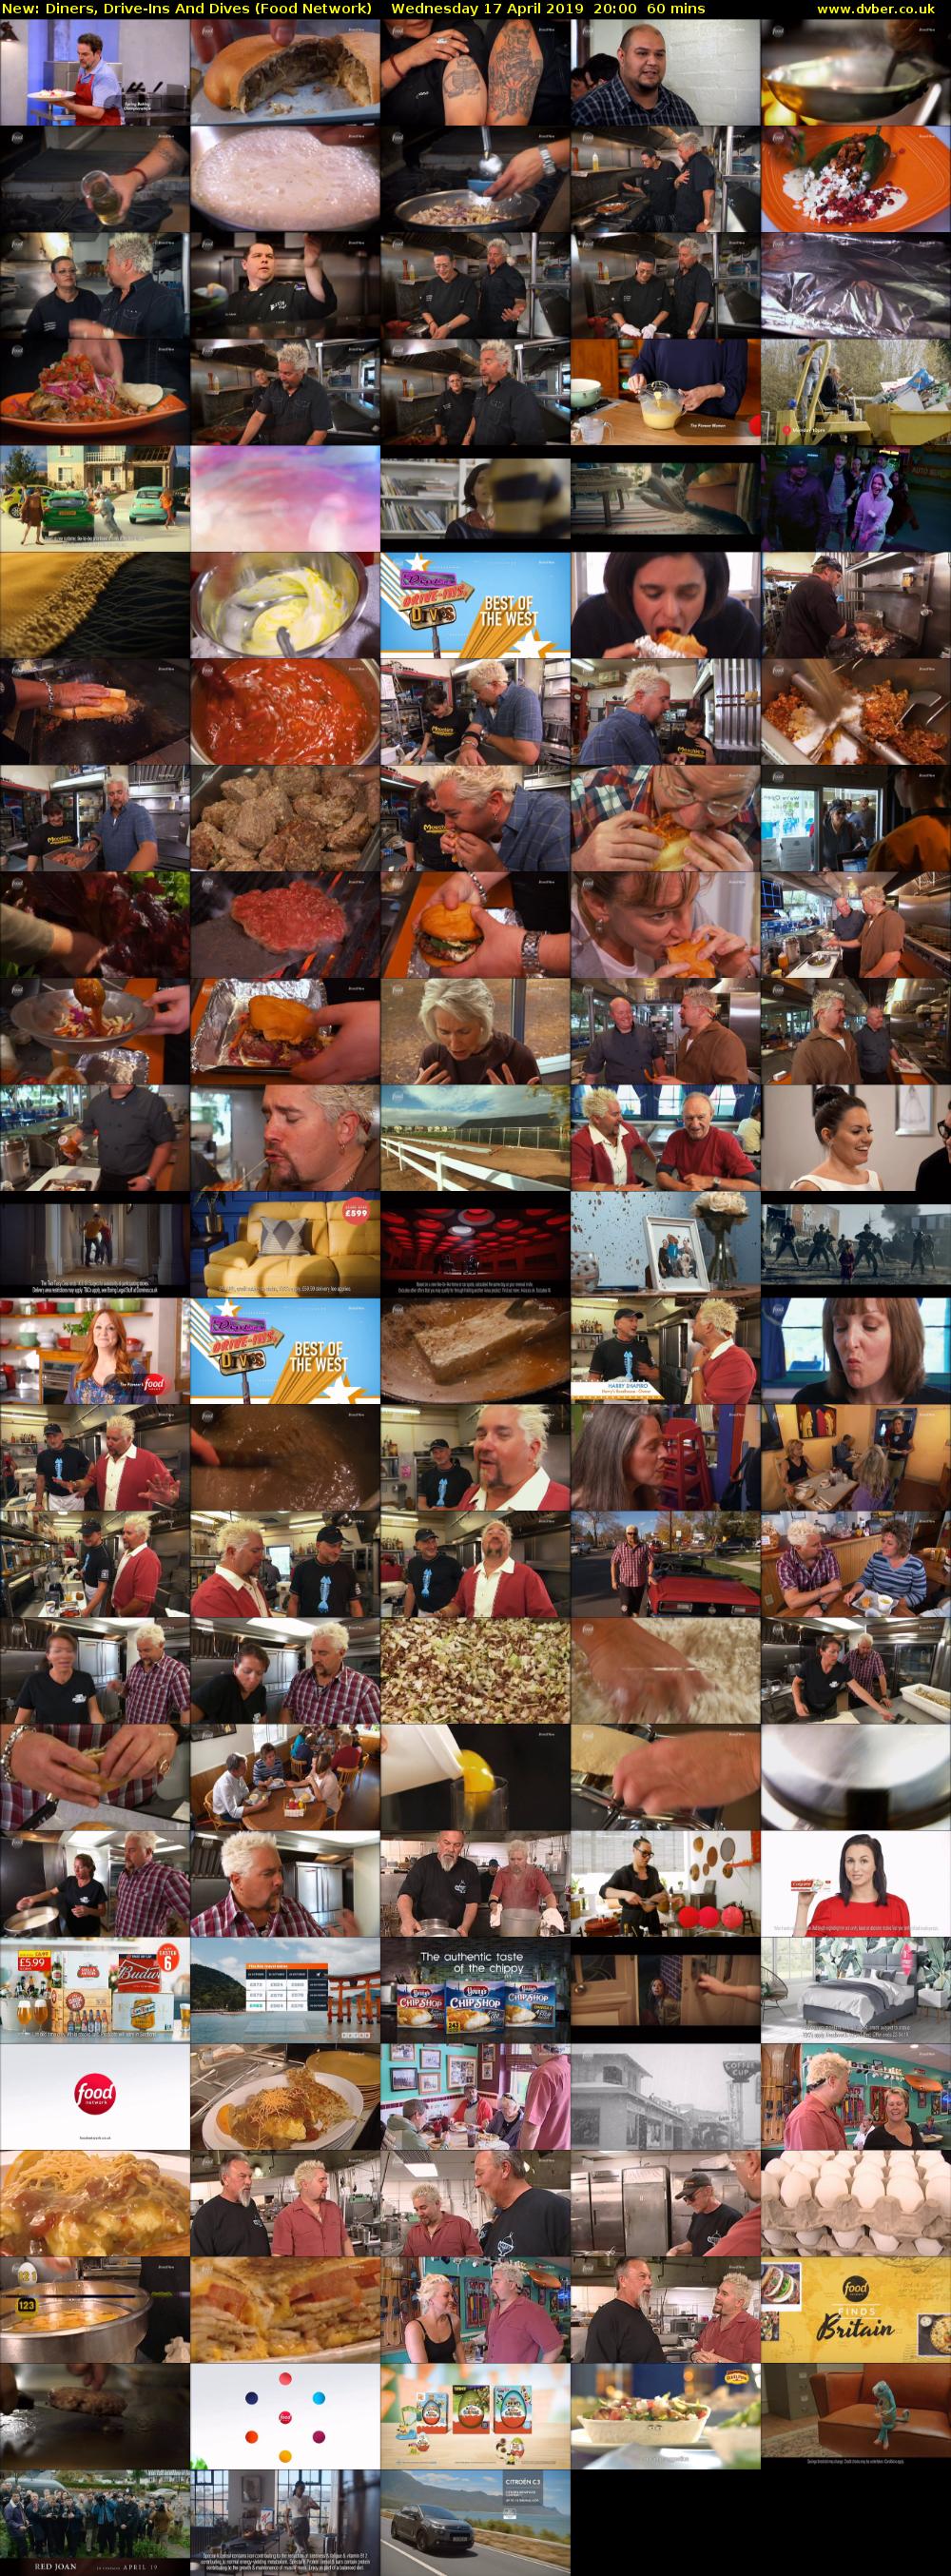 Diners, Drive-Ins And Dives (Food Network) Wednesday 17 April 2019 20:00 - 21:00